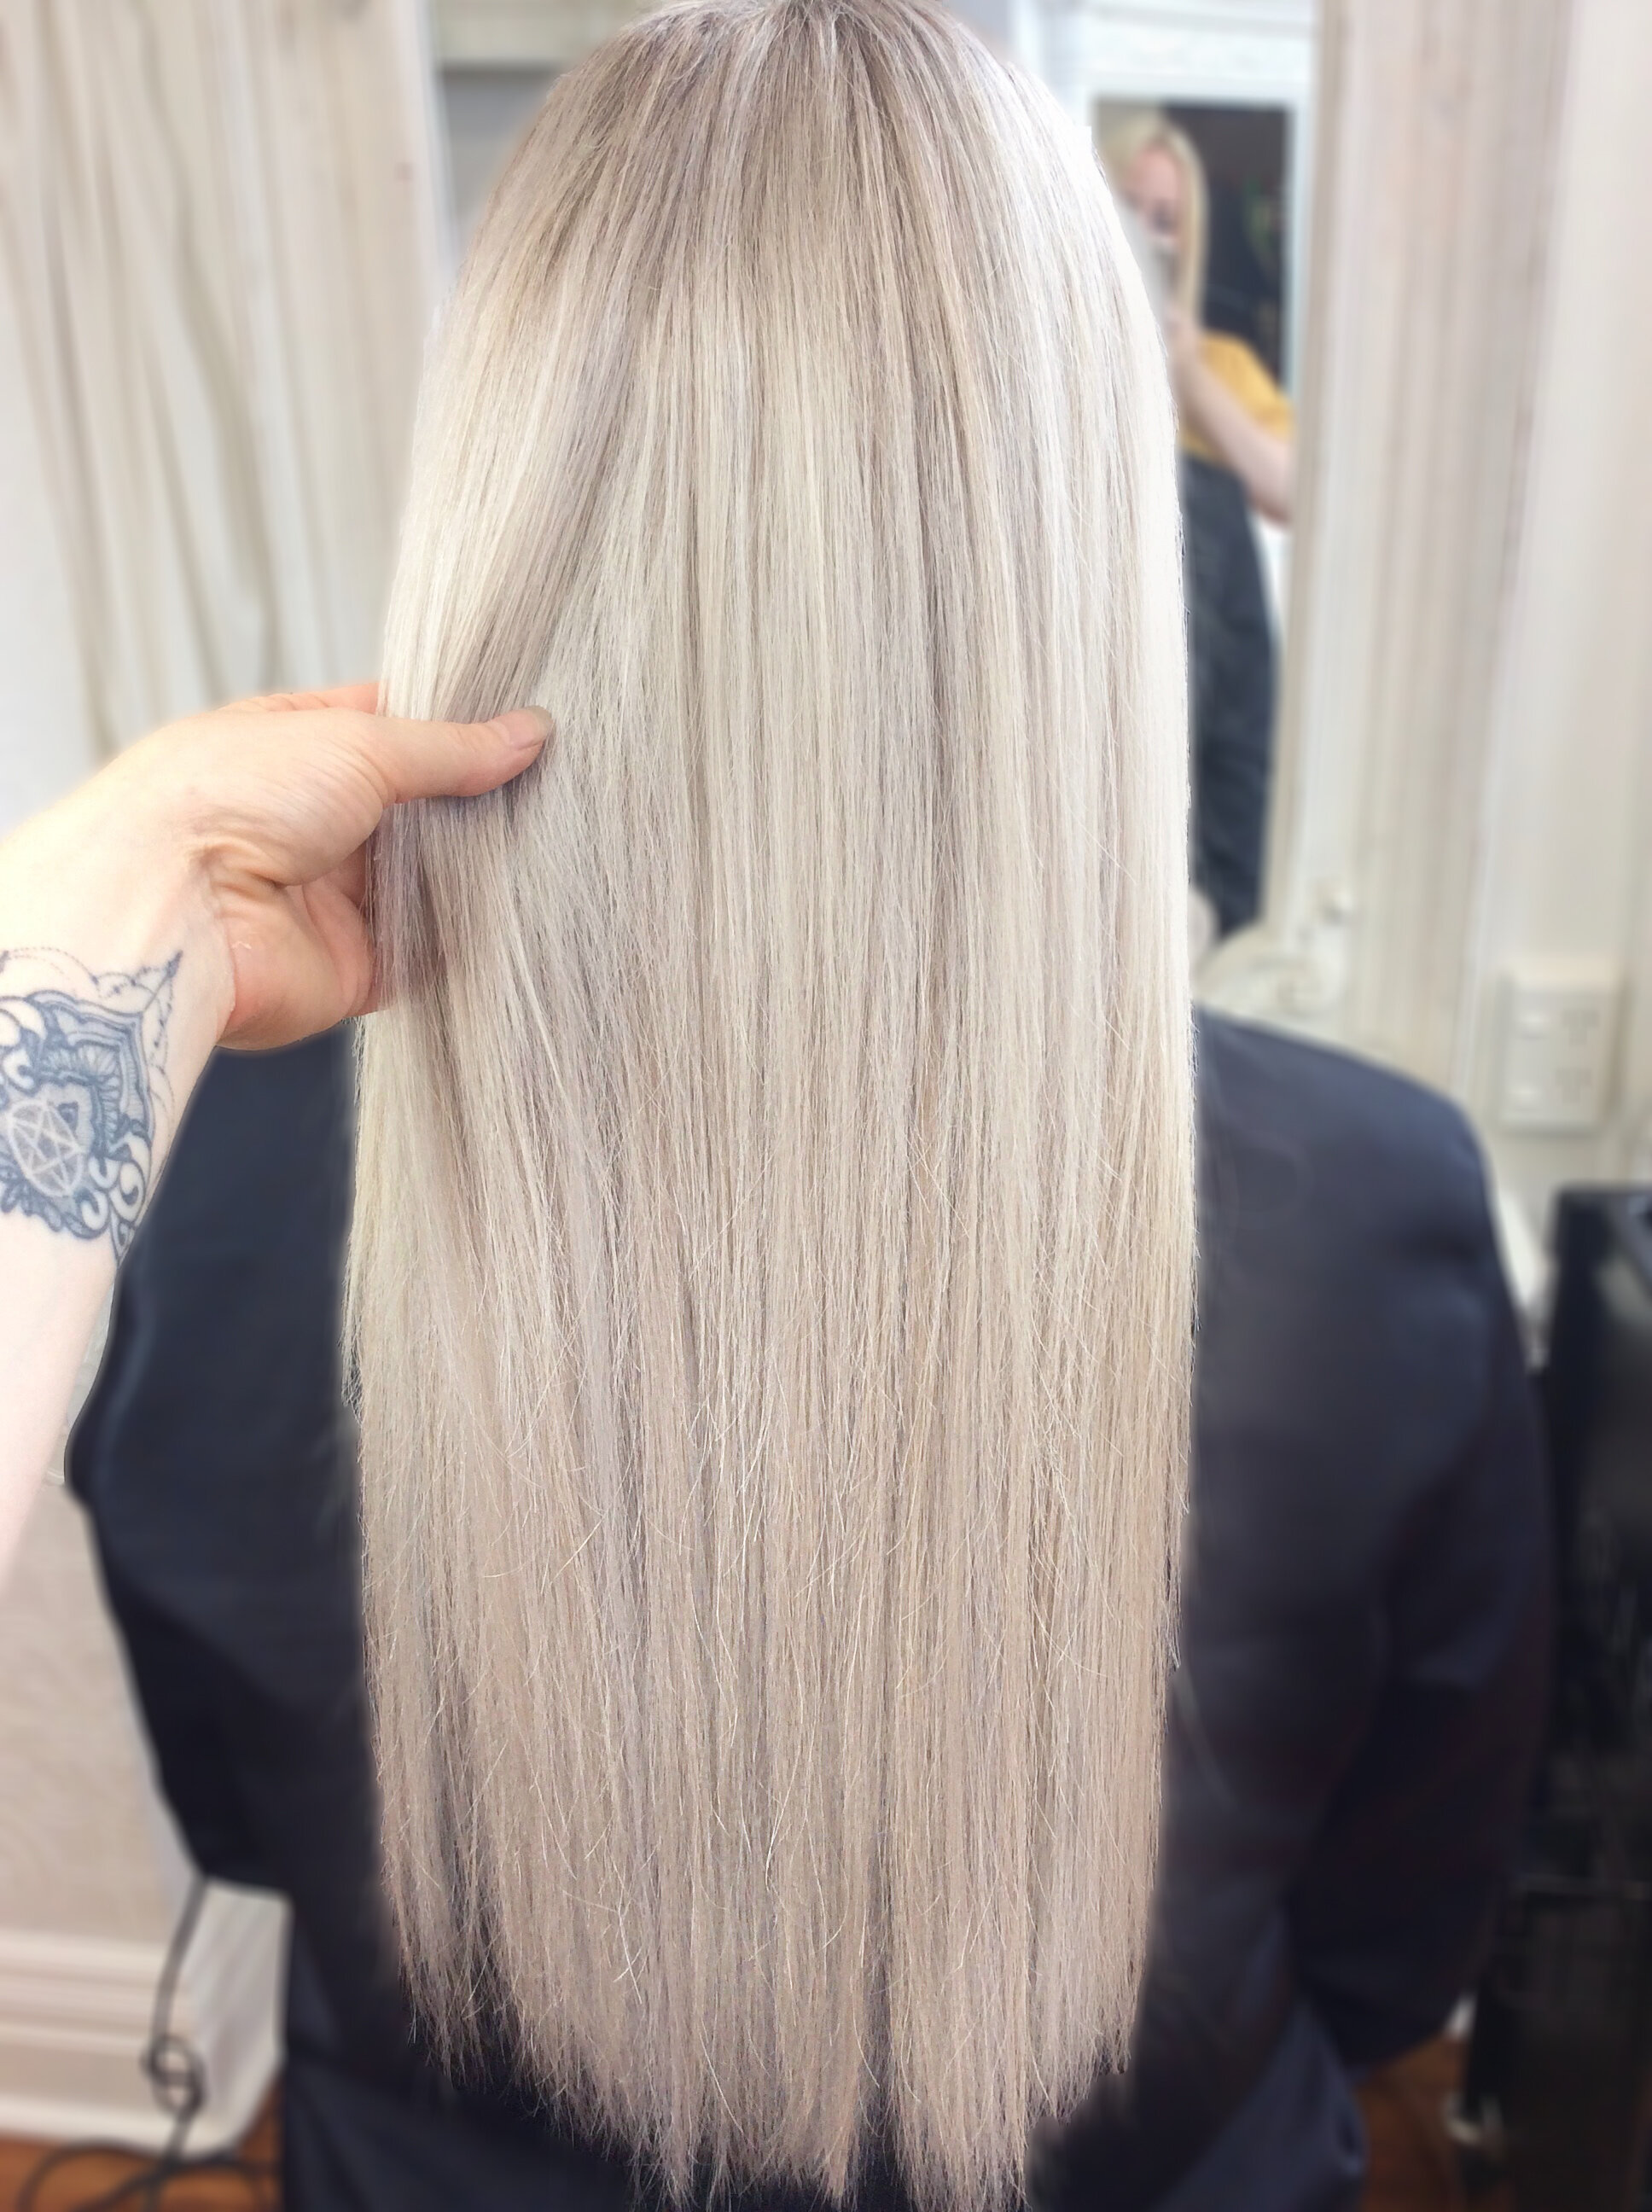 clip in hair extensions nz